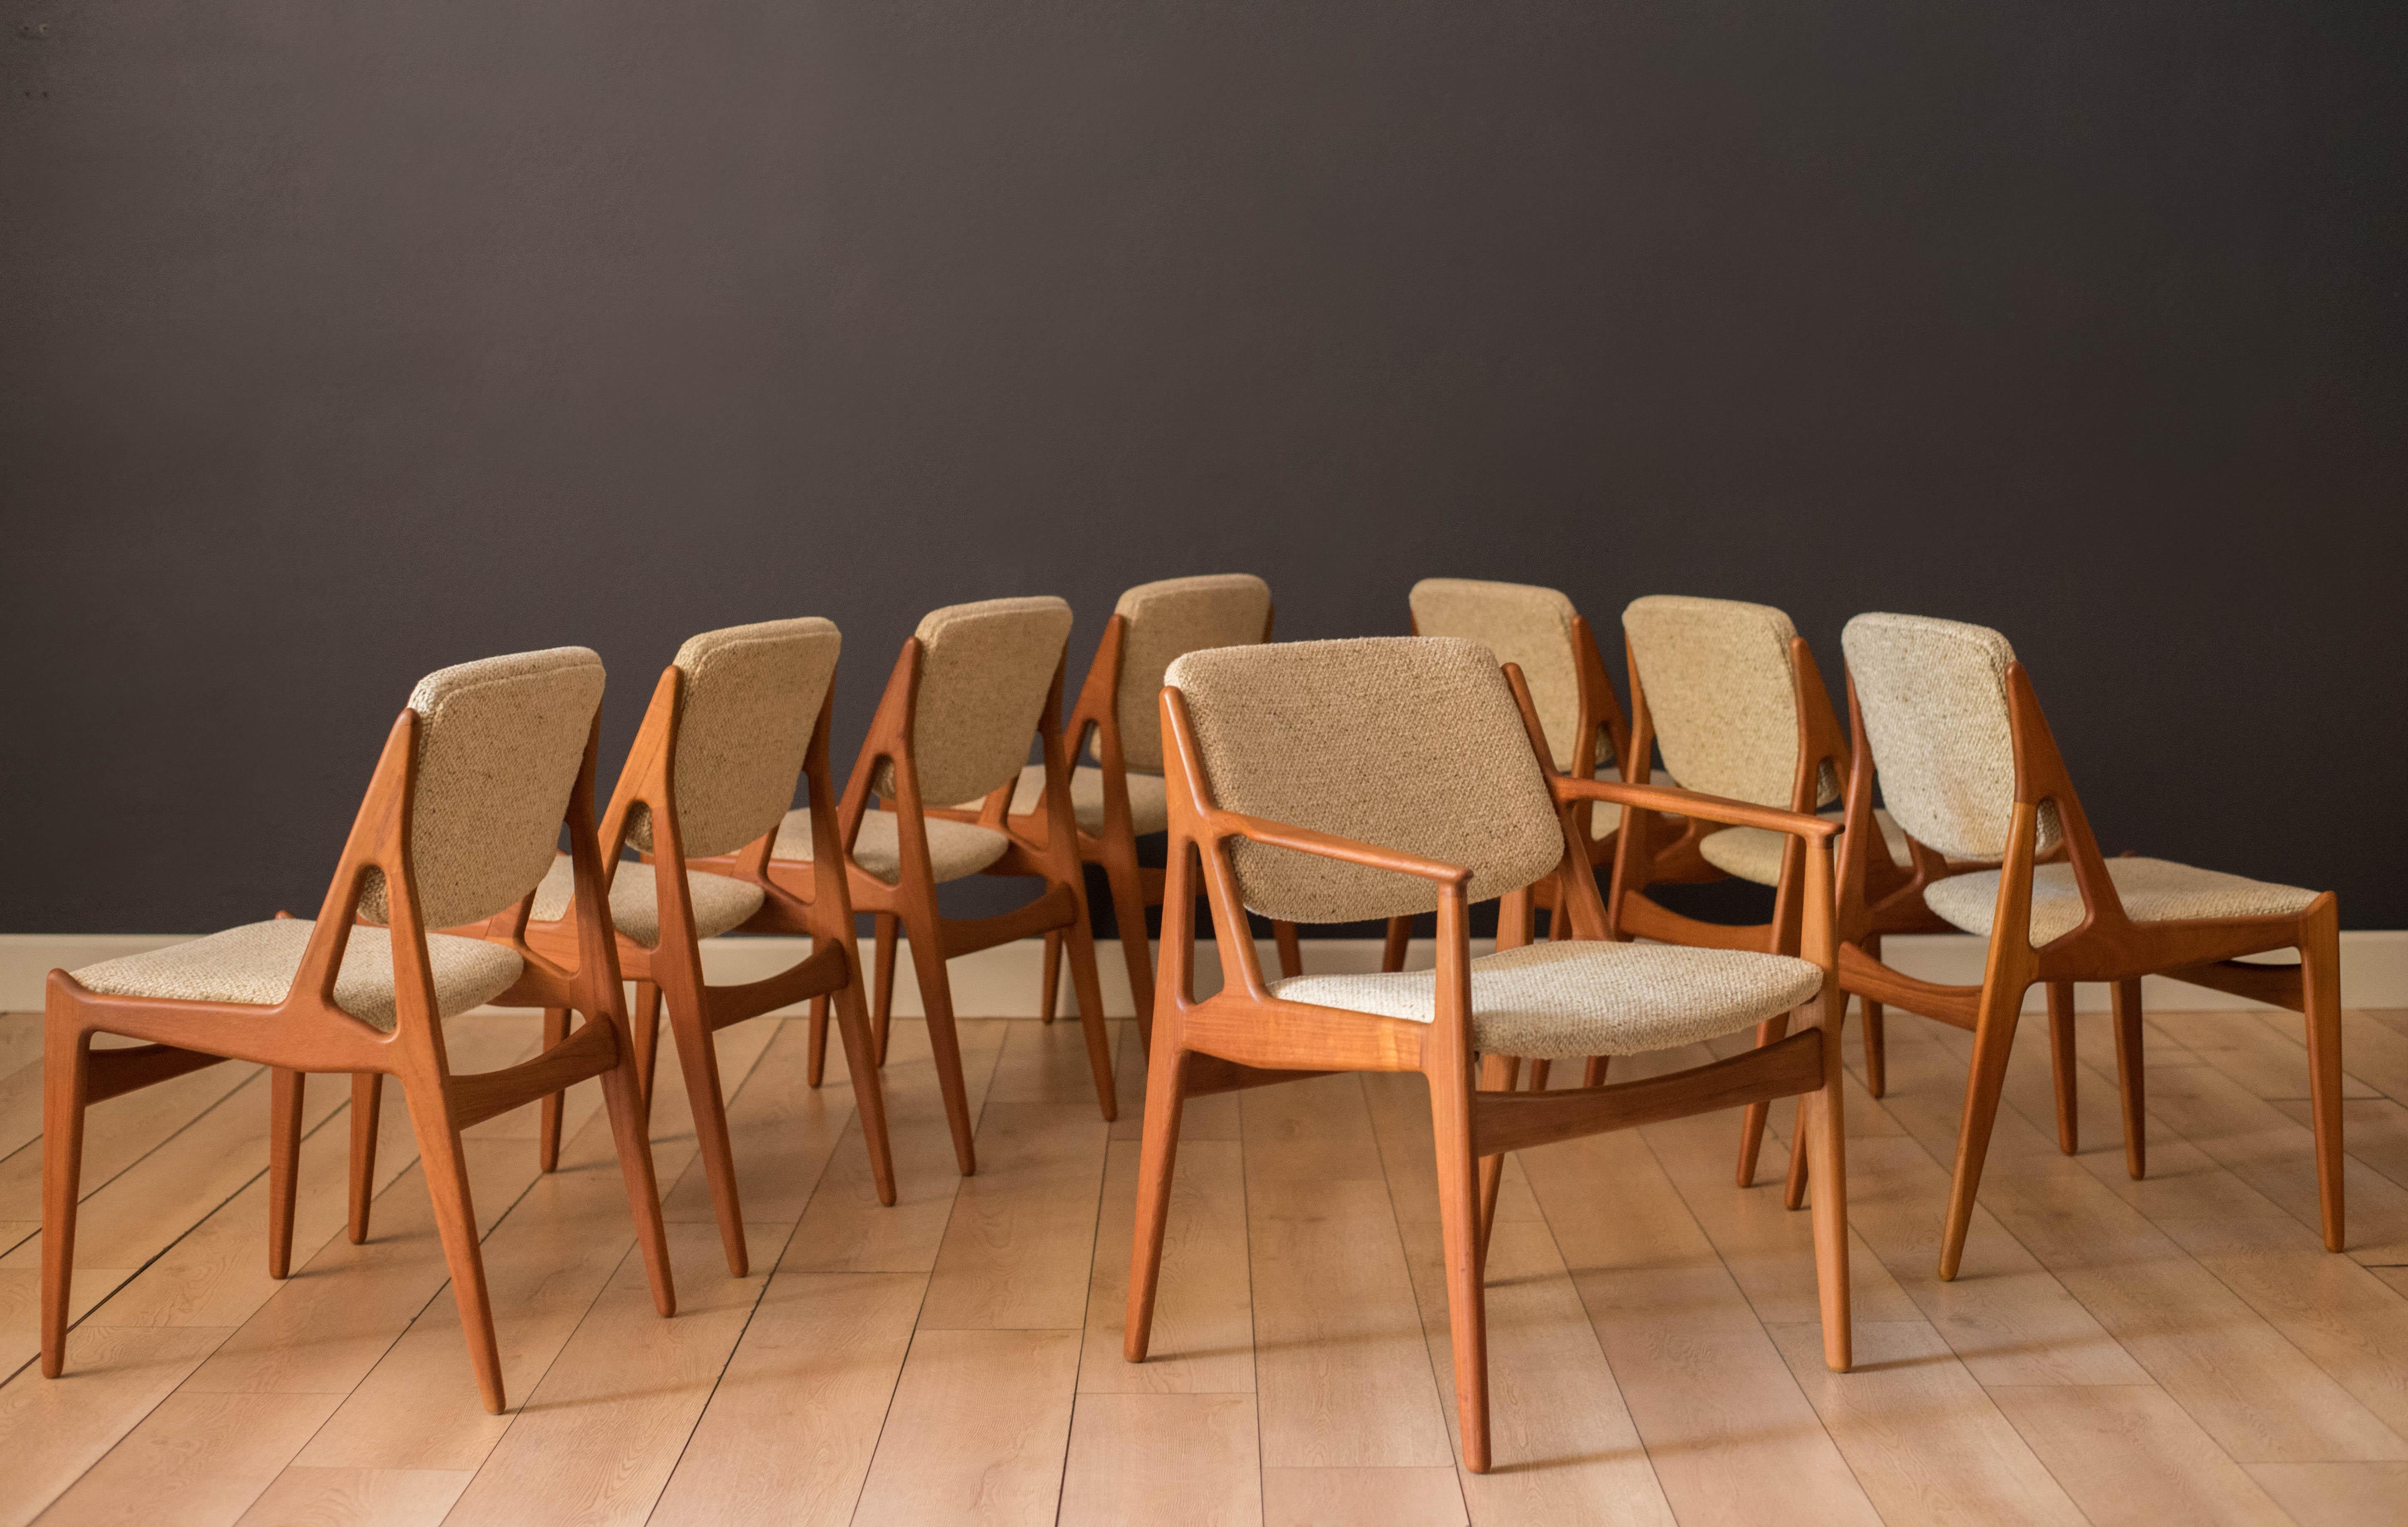 Mid century modern set of eight 'Ella' dining chairs designed by Arne Vodder for Vamo Sonderborg, circa 1960's. Features sculptural solid teak frames and a unique swivel tilting backrest in an oatmeal tweed fabric. The set includes seven side chairs